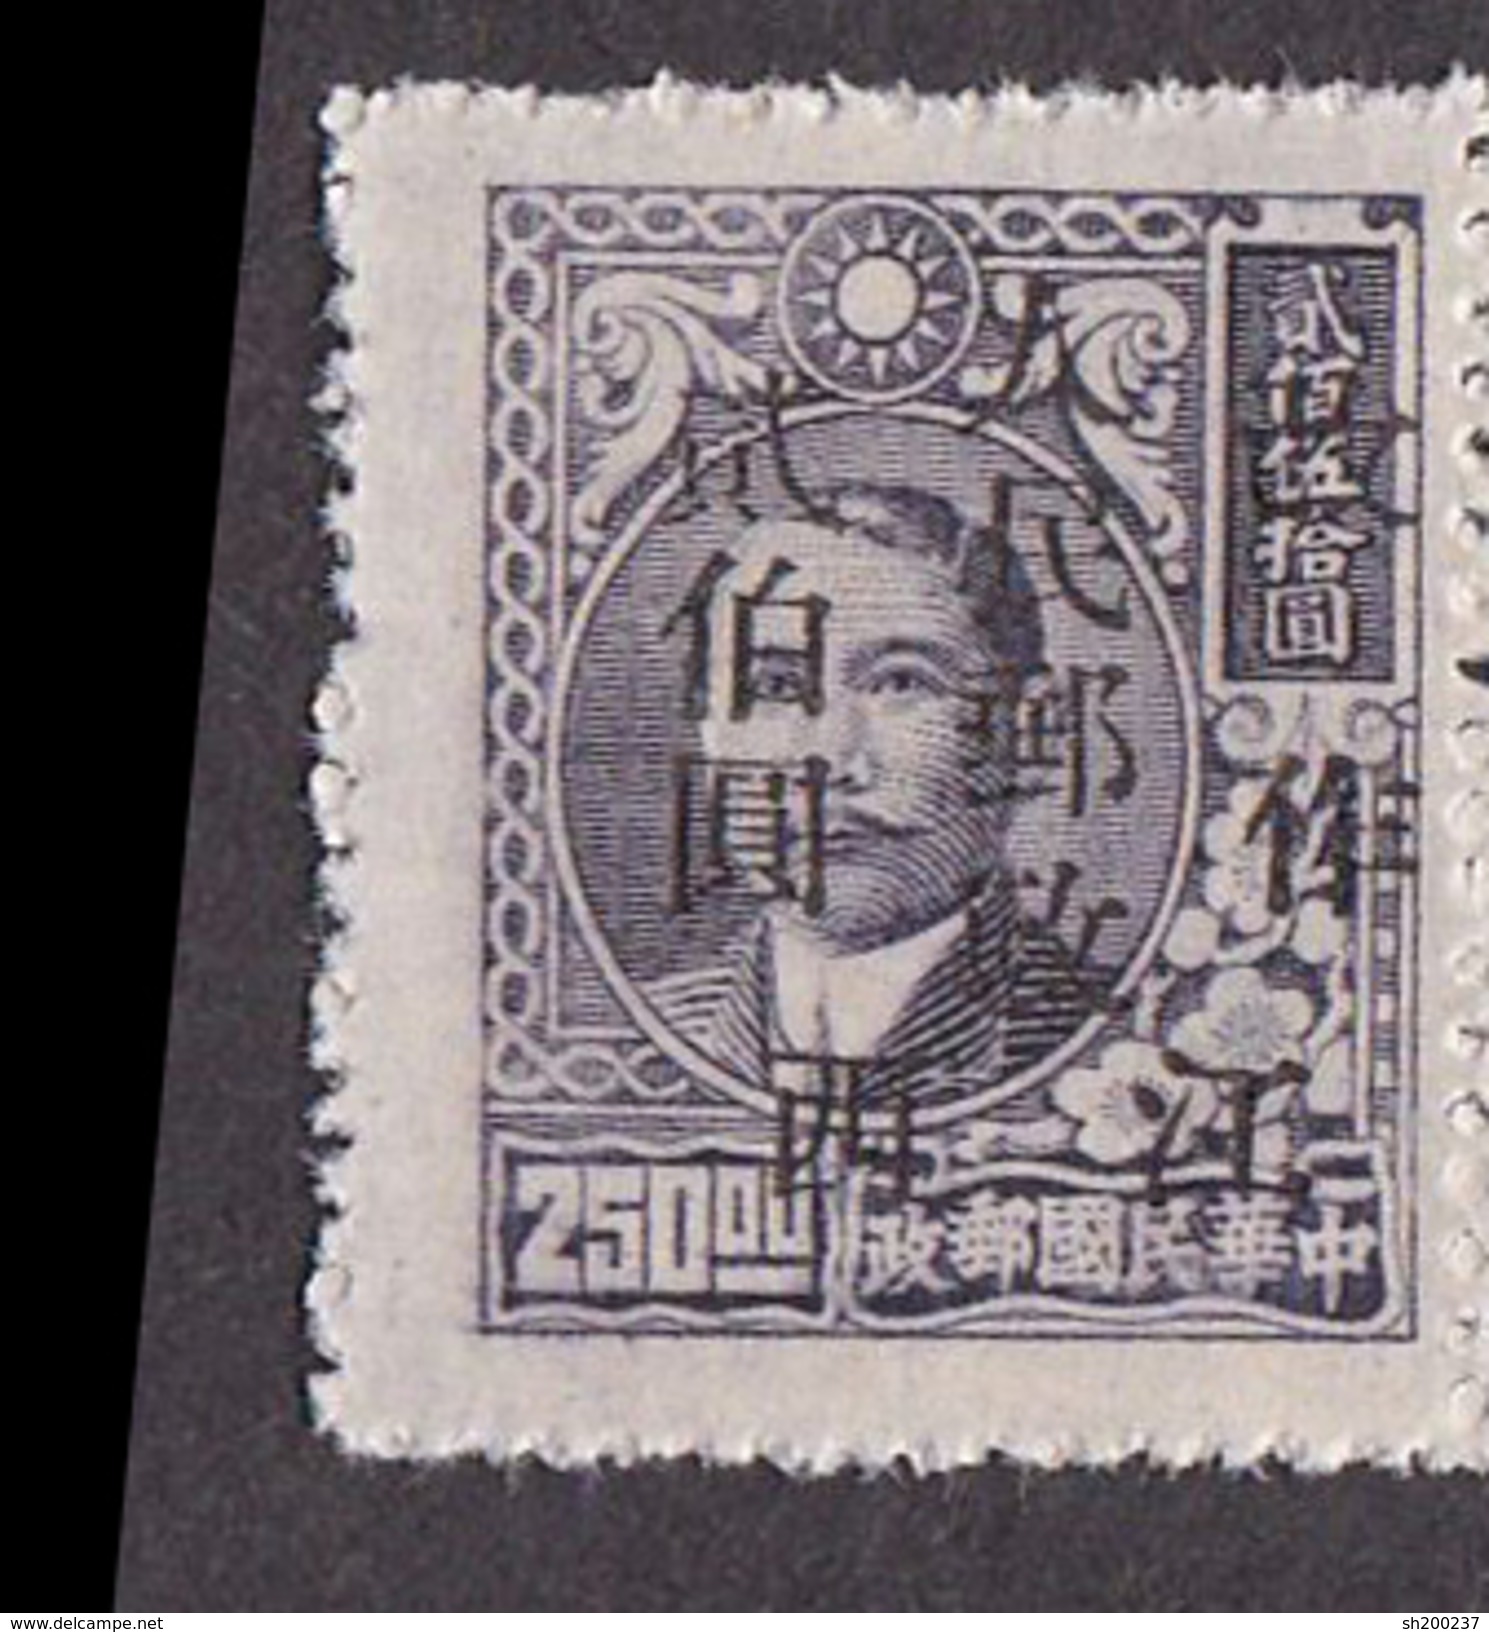 Liberated  Central China 1949  CC159 (6L32) $200 On $250 Slate Voilet - Chine Centrale 1948-49